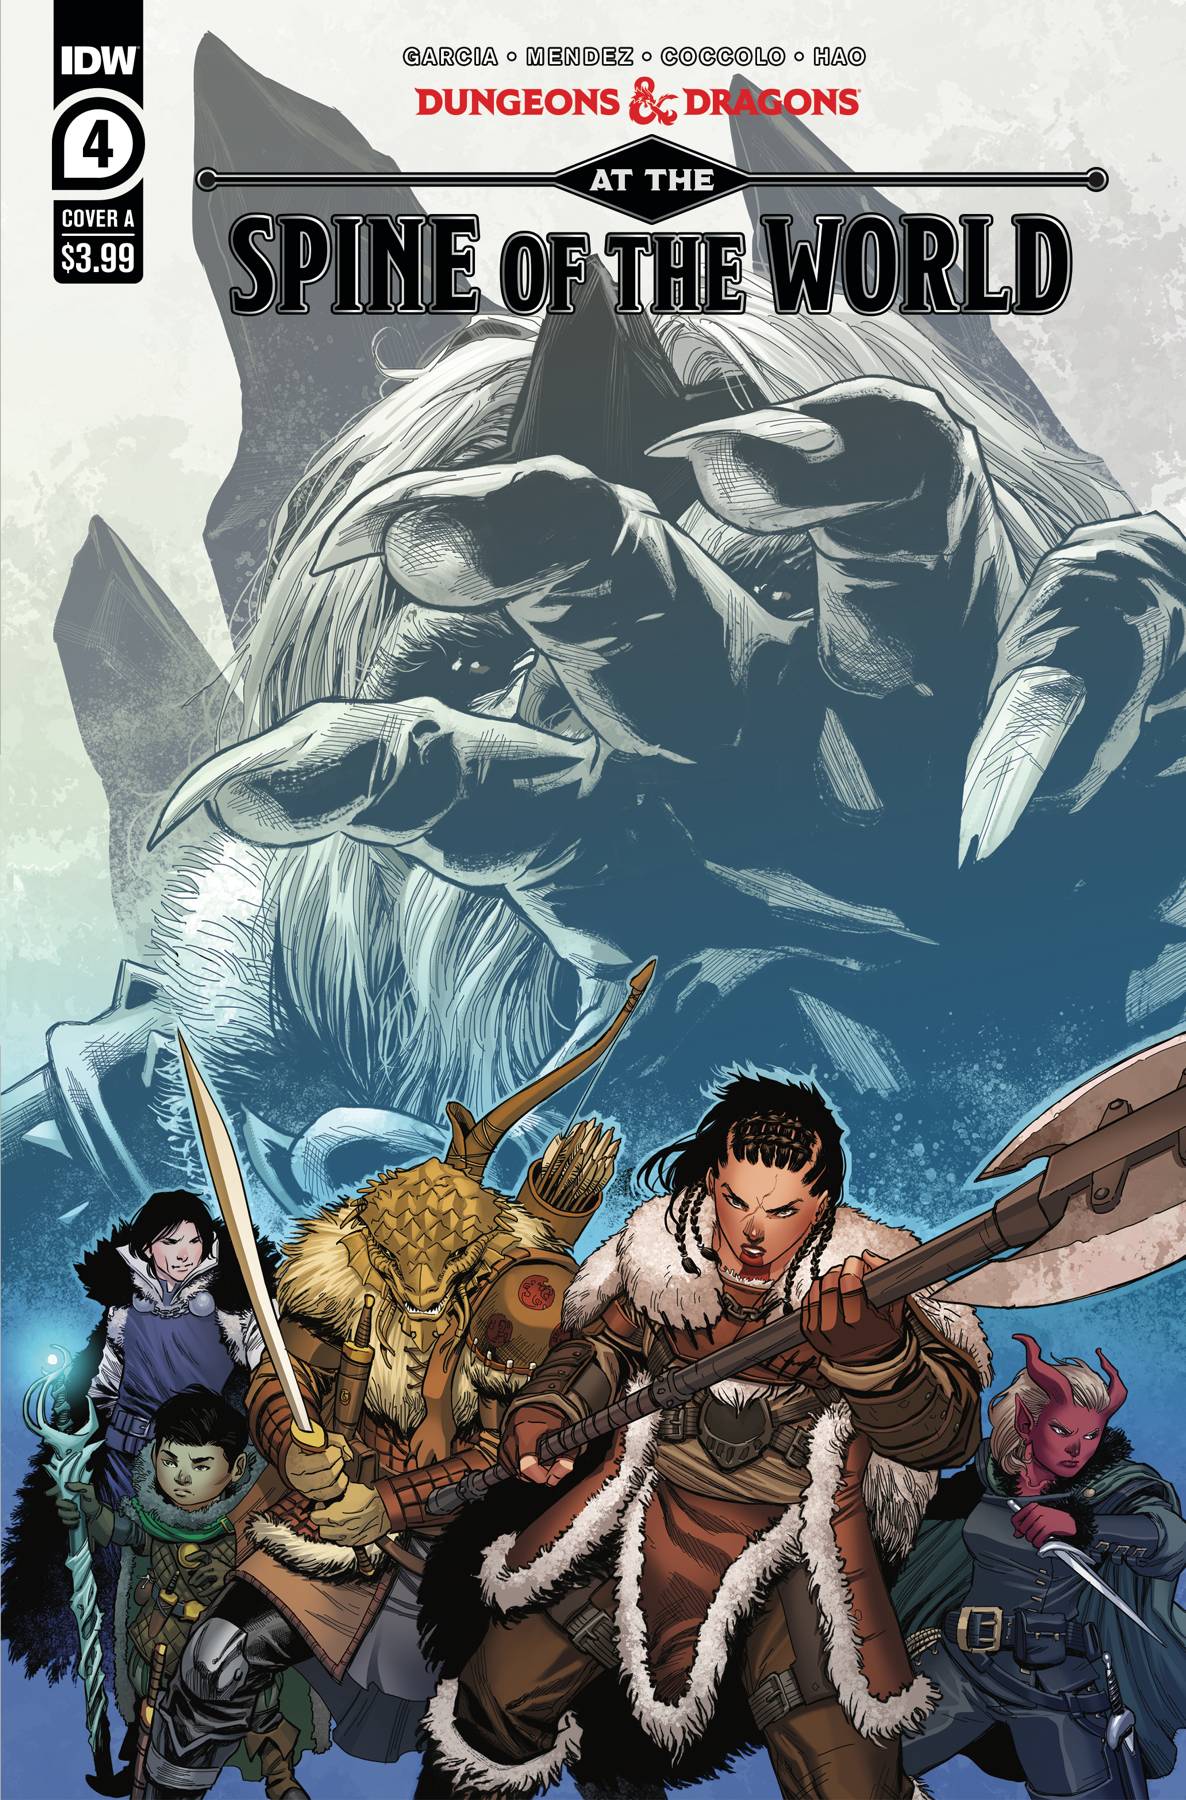 Dungeons & Dragons: At the Spine of the World (2020) #4 (of 4)